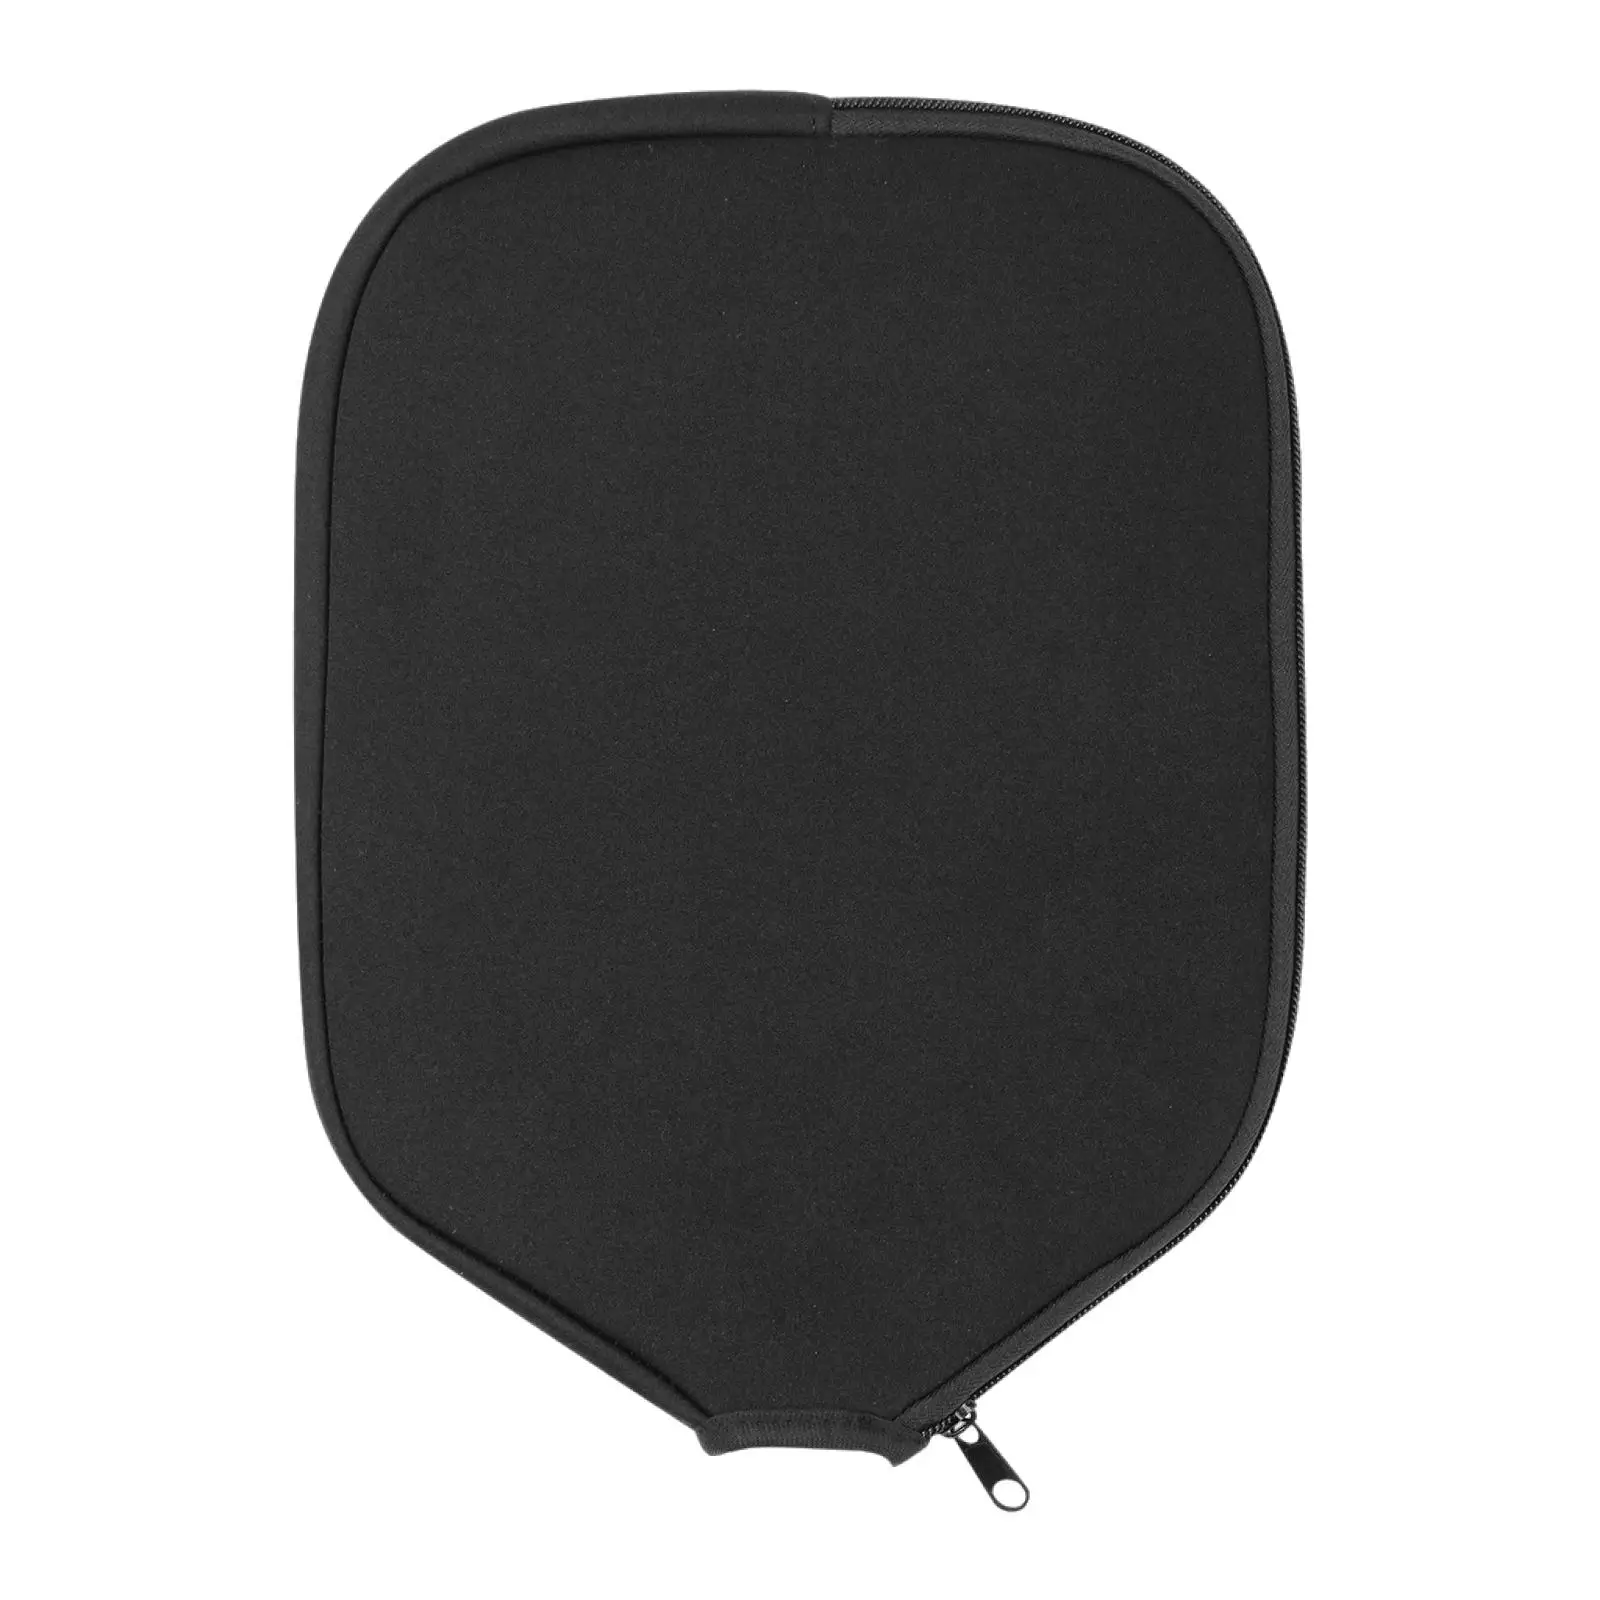 Pickleball Paddle Cover Only Fits Most Paddle 11.8 x 8.86 inch Neoprene Protective Cover Holder Pouch Table Tennis Paddle Case